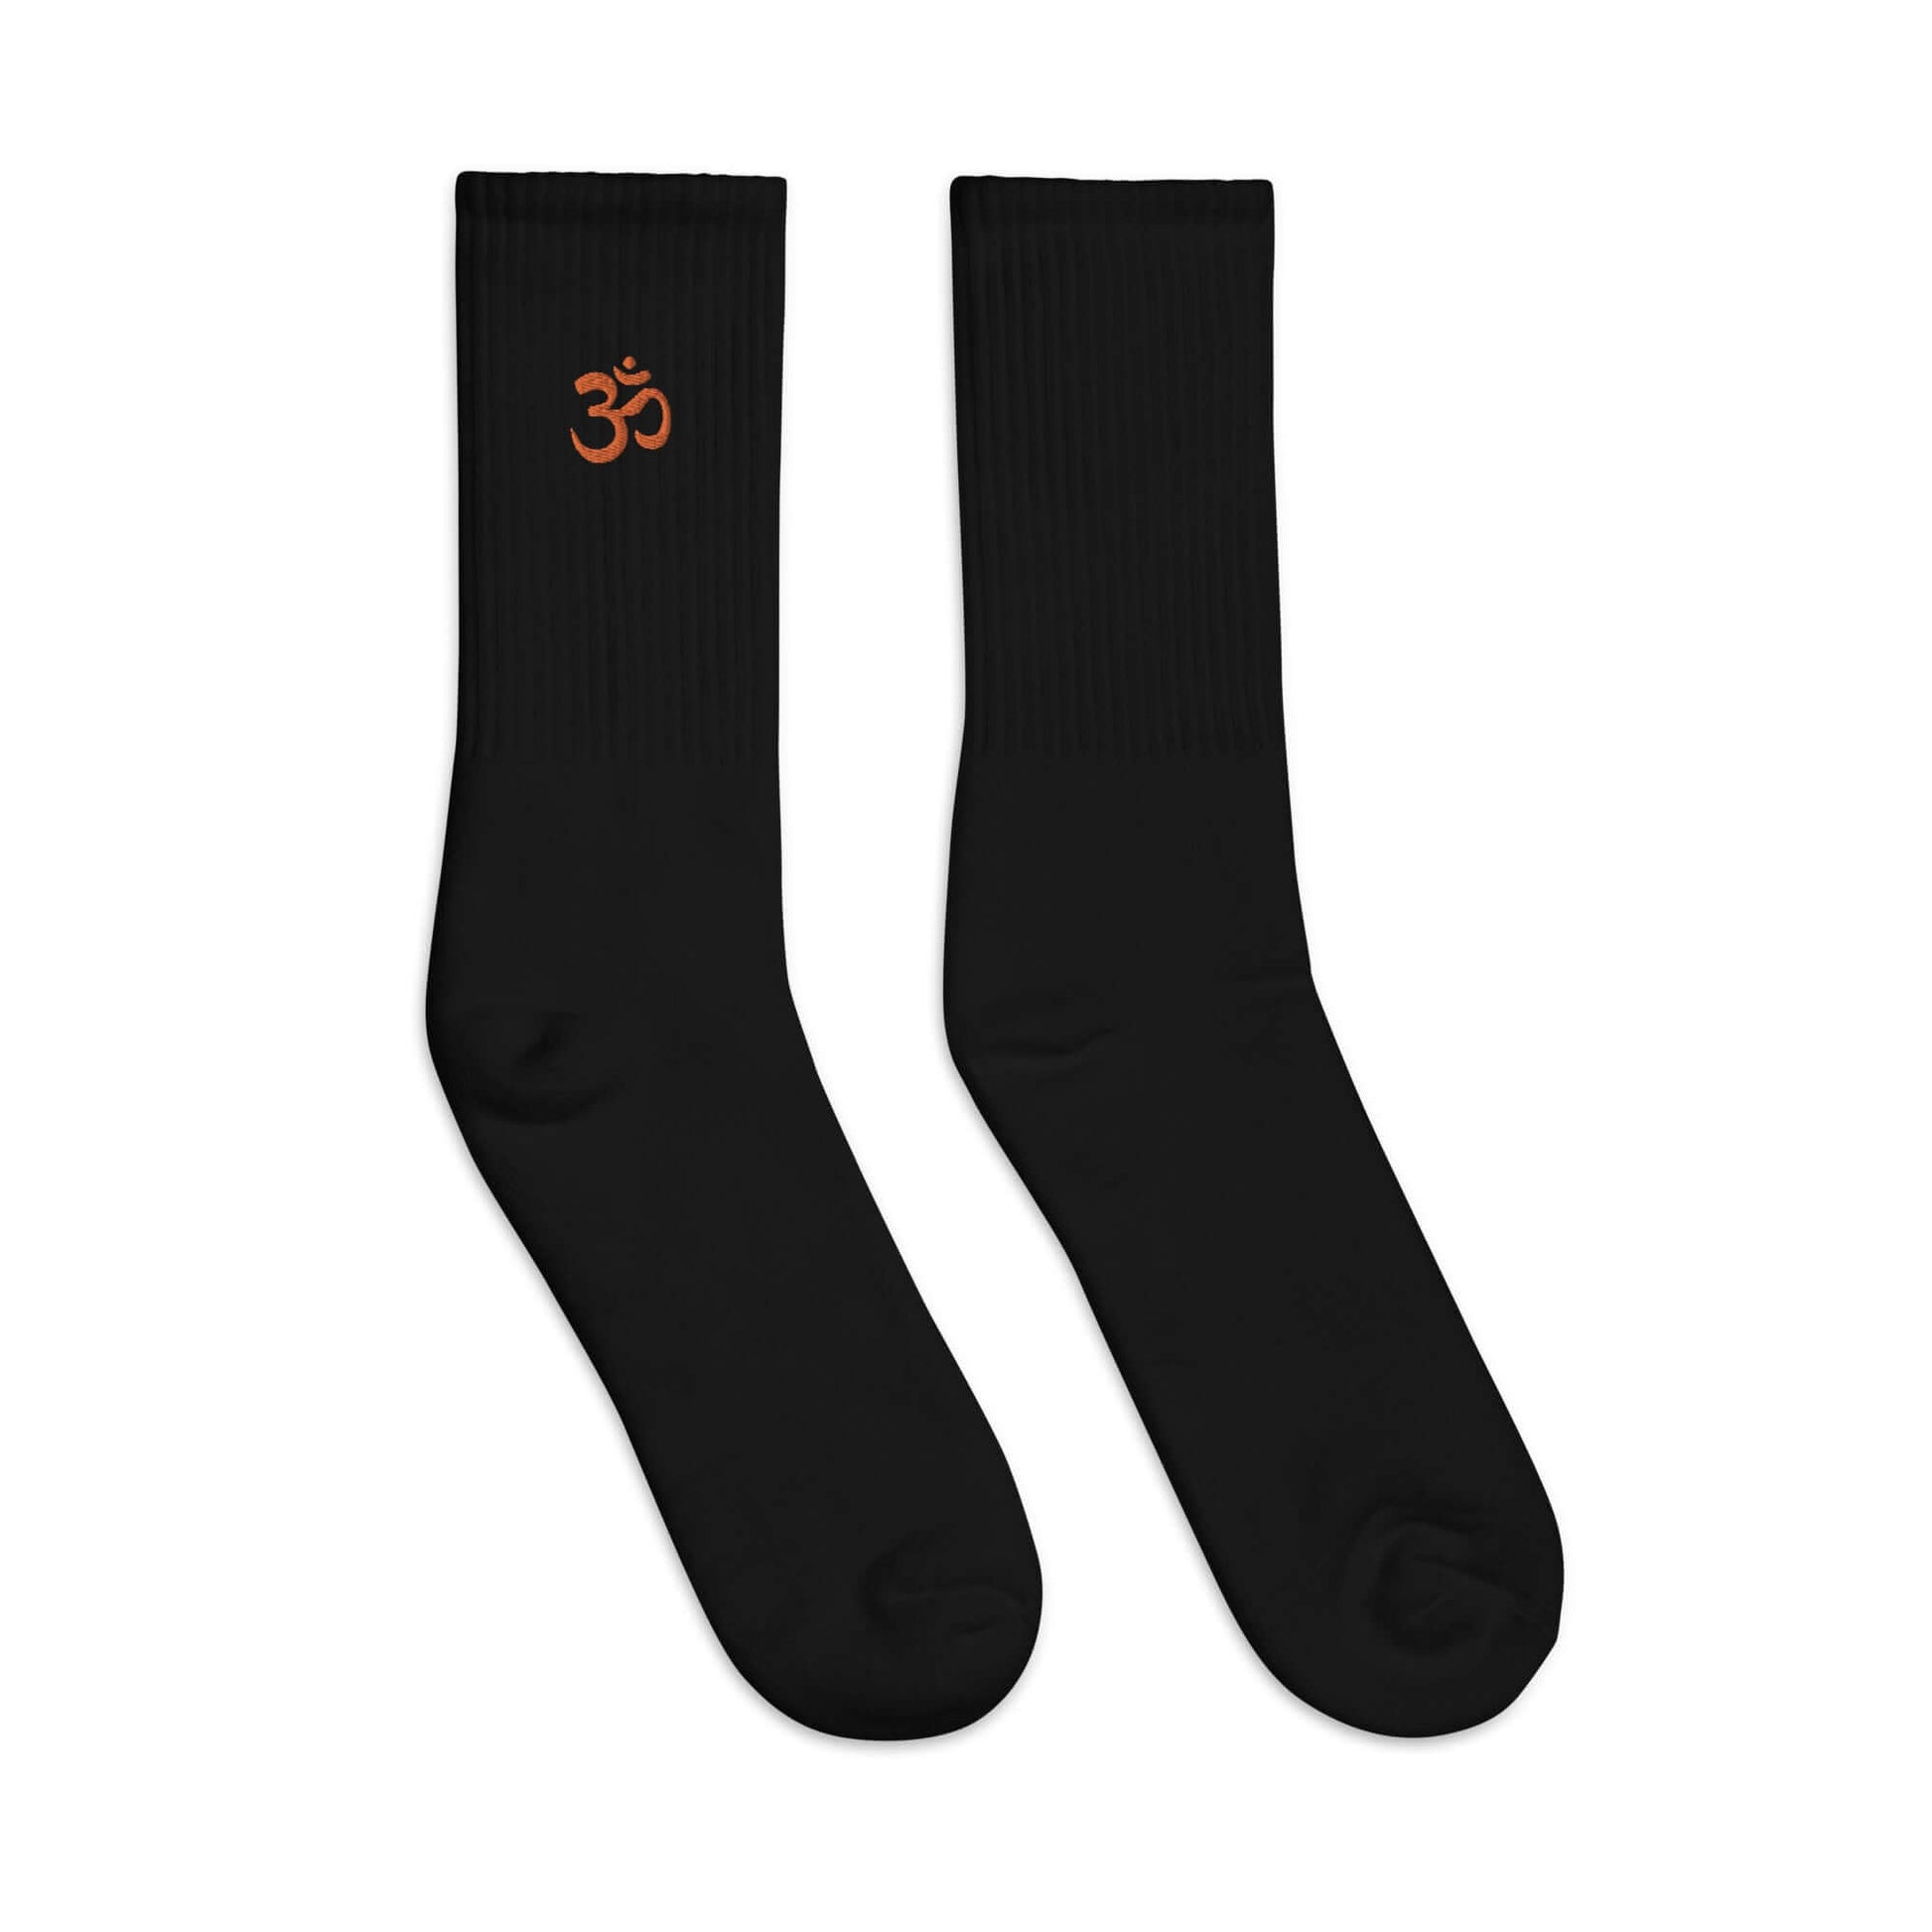 OM Embroidered Socks Black Practice Pieces